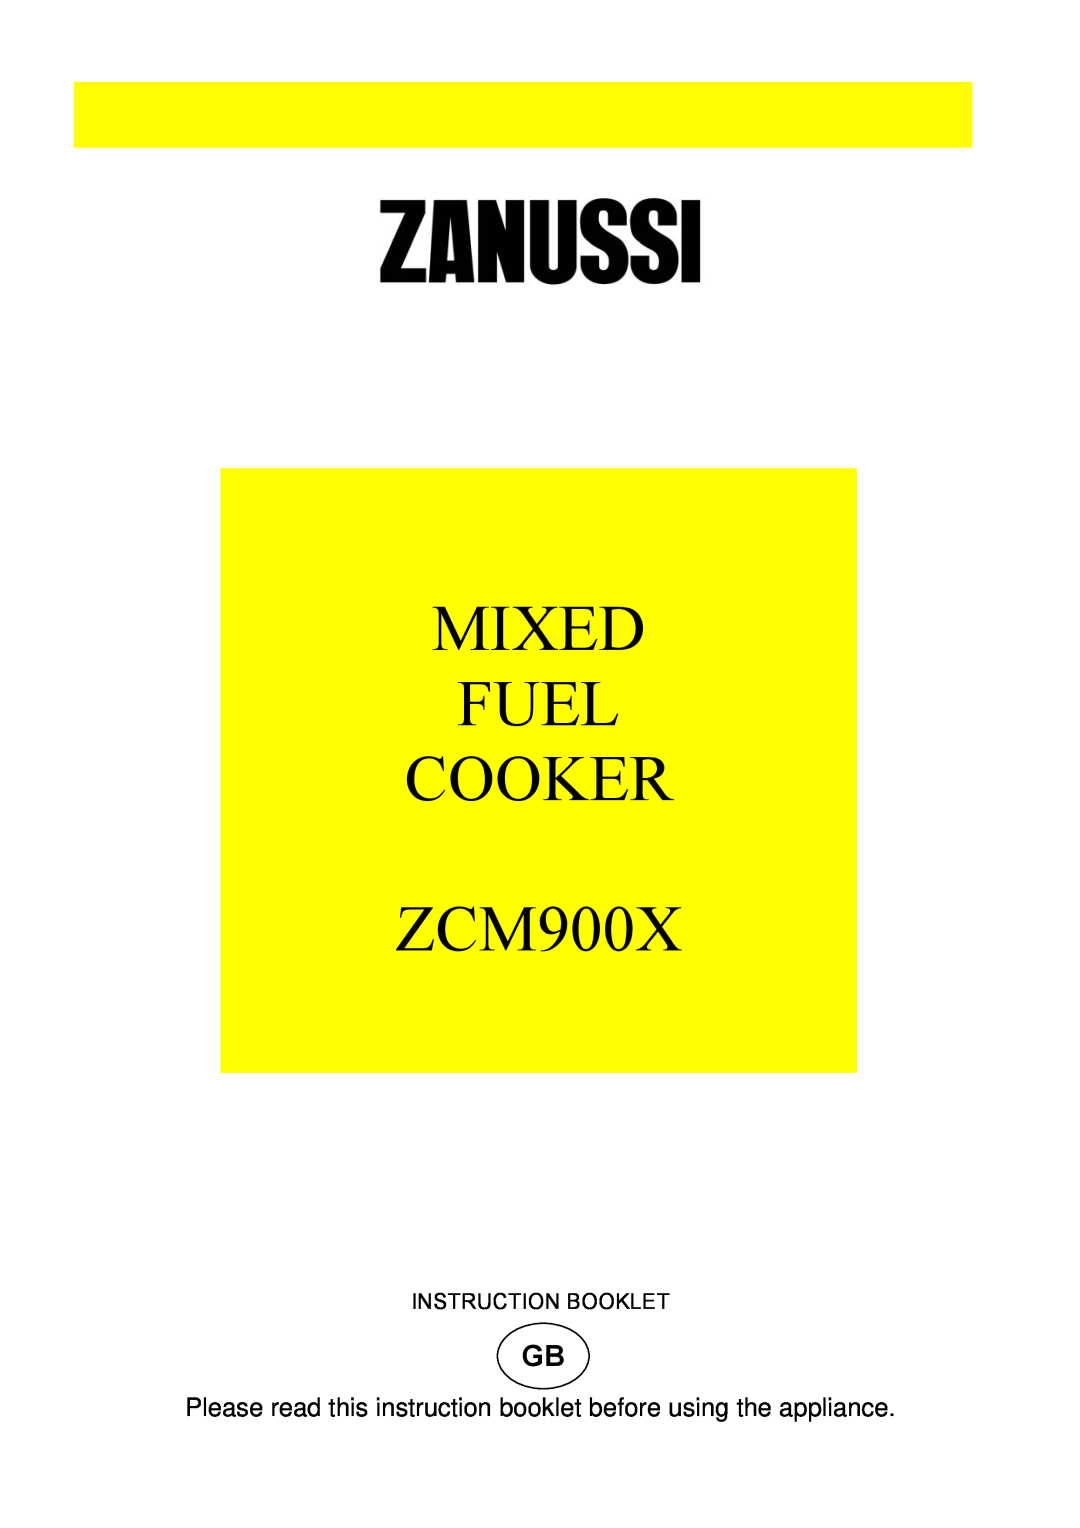 Zanussi manual MIXED FUEL COOKER ZCM900X, Please read this instruction booklet before using the appliance 